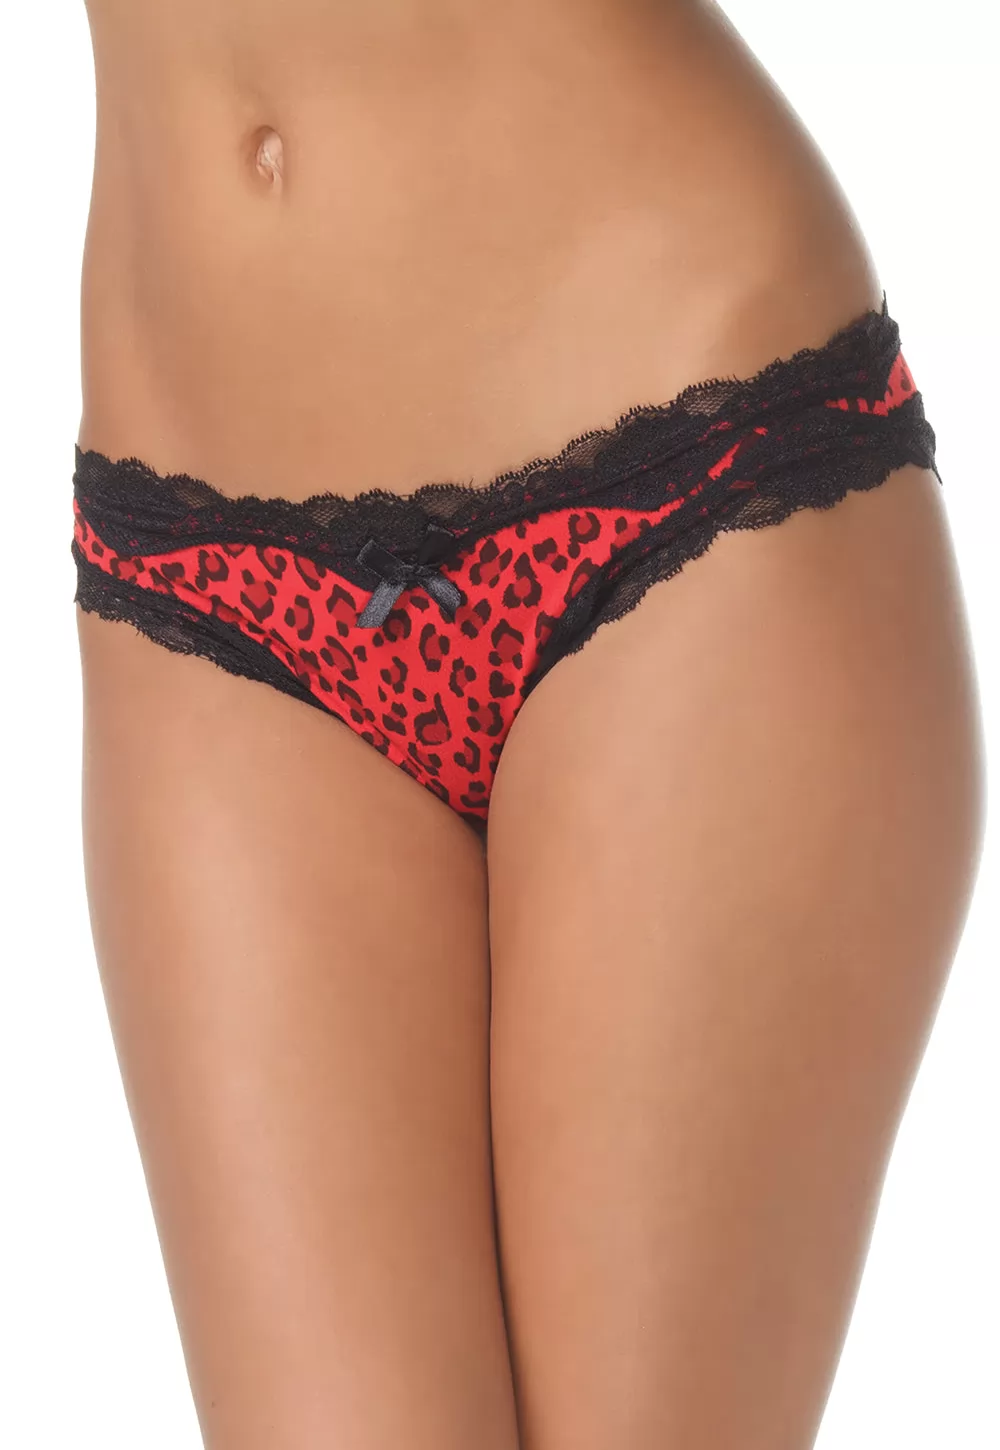 Crotchless red leopard panties